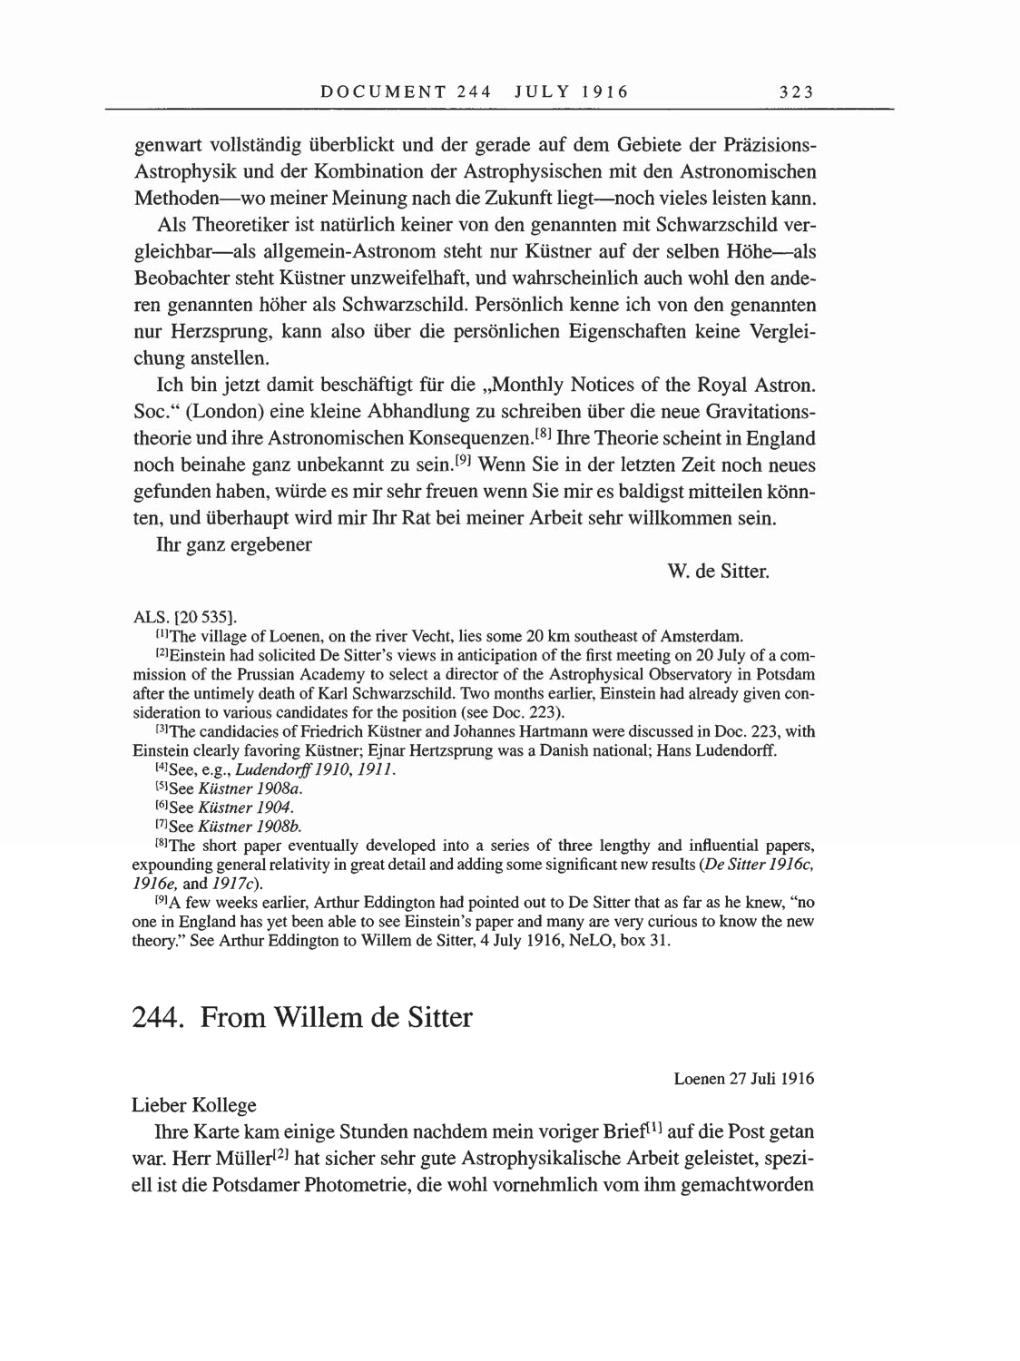 Volume 8, Part A: The Berlin Years: Correspondence 1914-1917 page 323